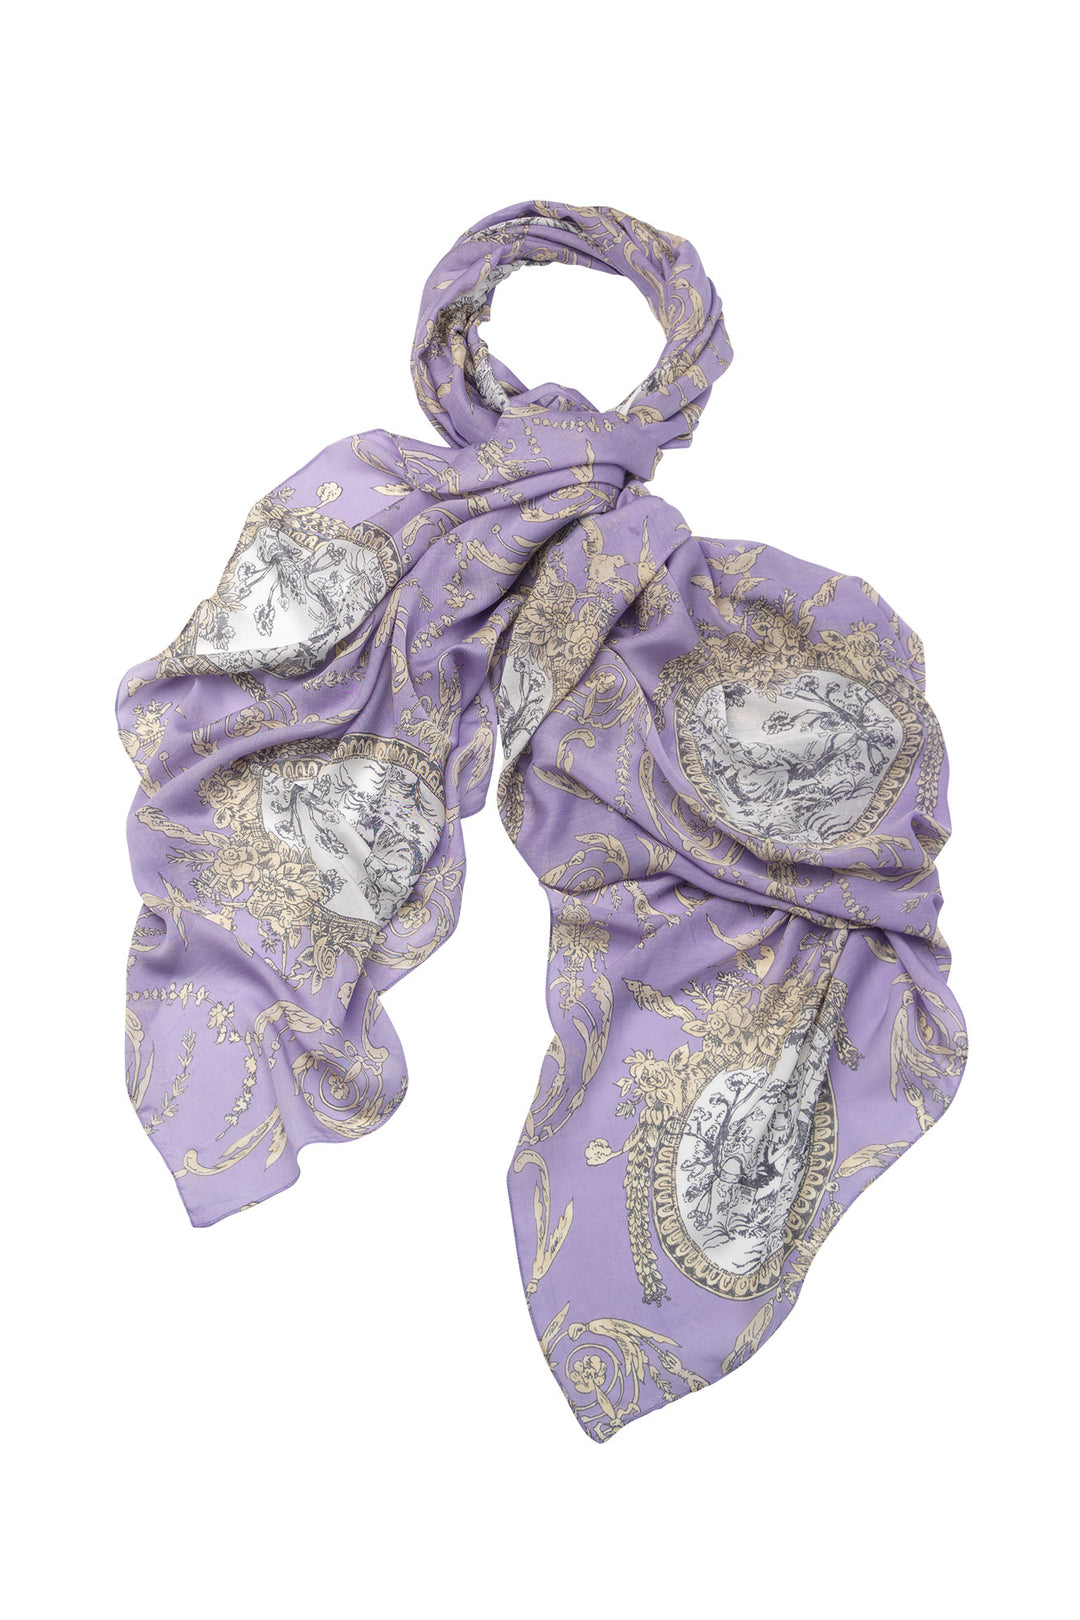 Women's accessories, gifts for her. Large scarf  in lilac purple with valentine floral print by One Hundred Stars